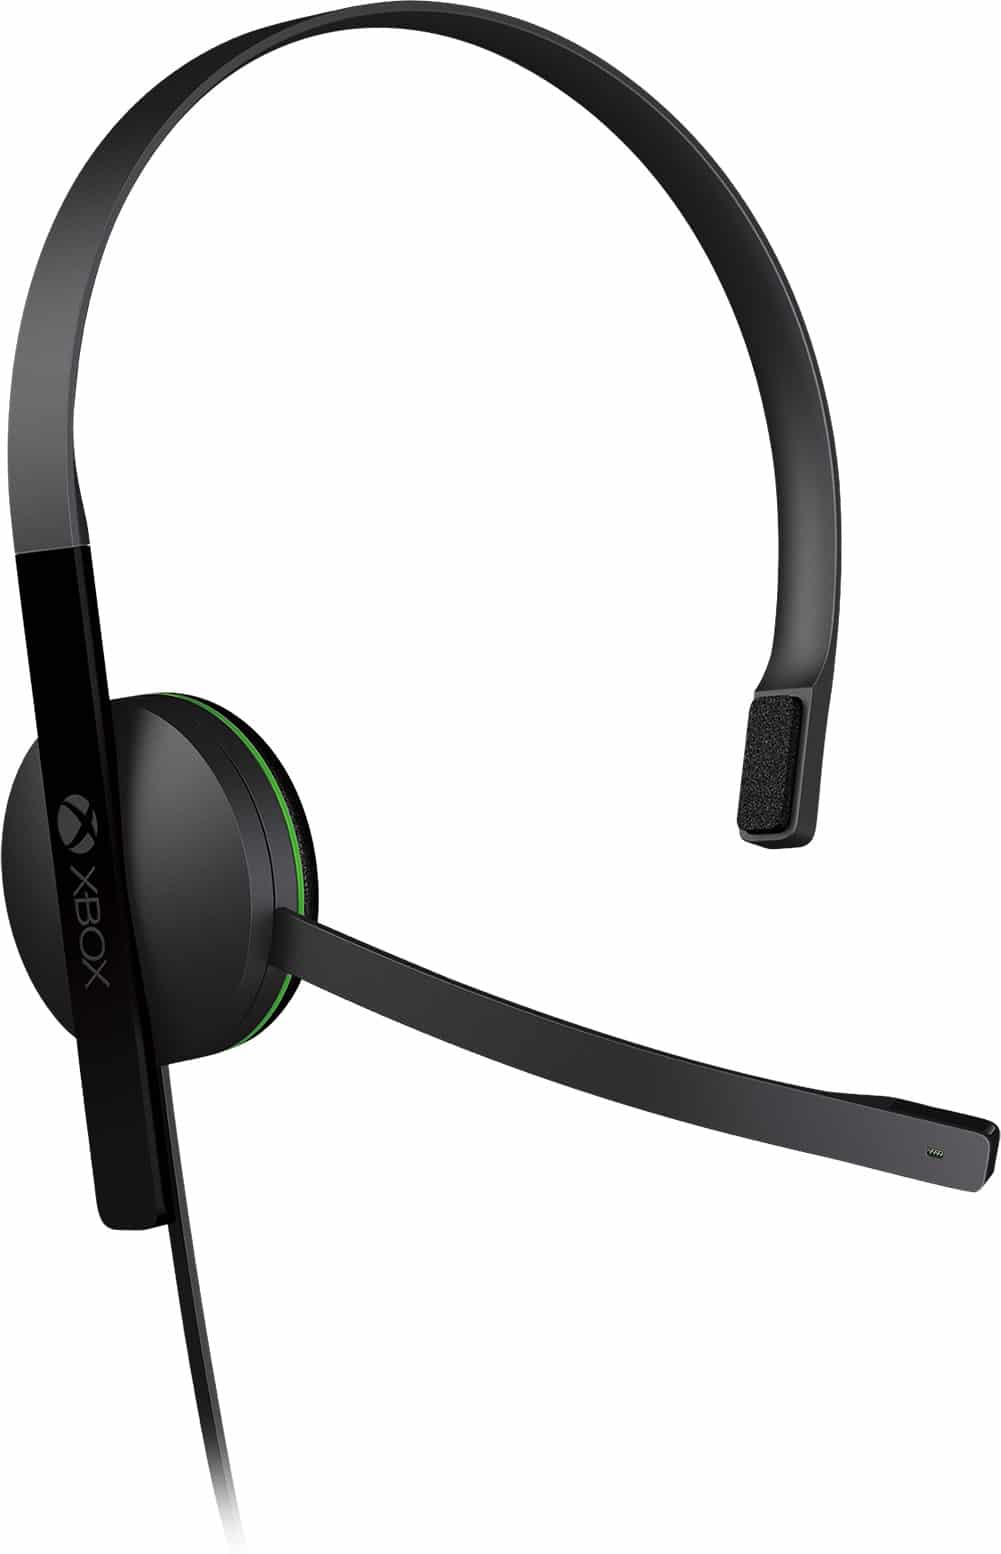 Microsoft Xbox One Chat Headset Left View